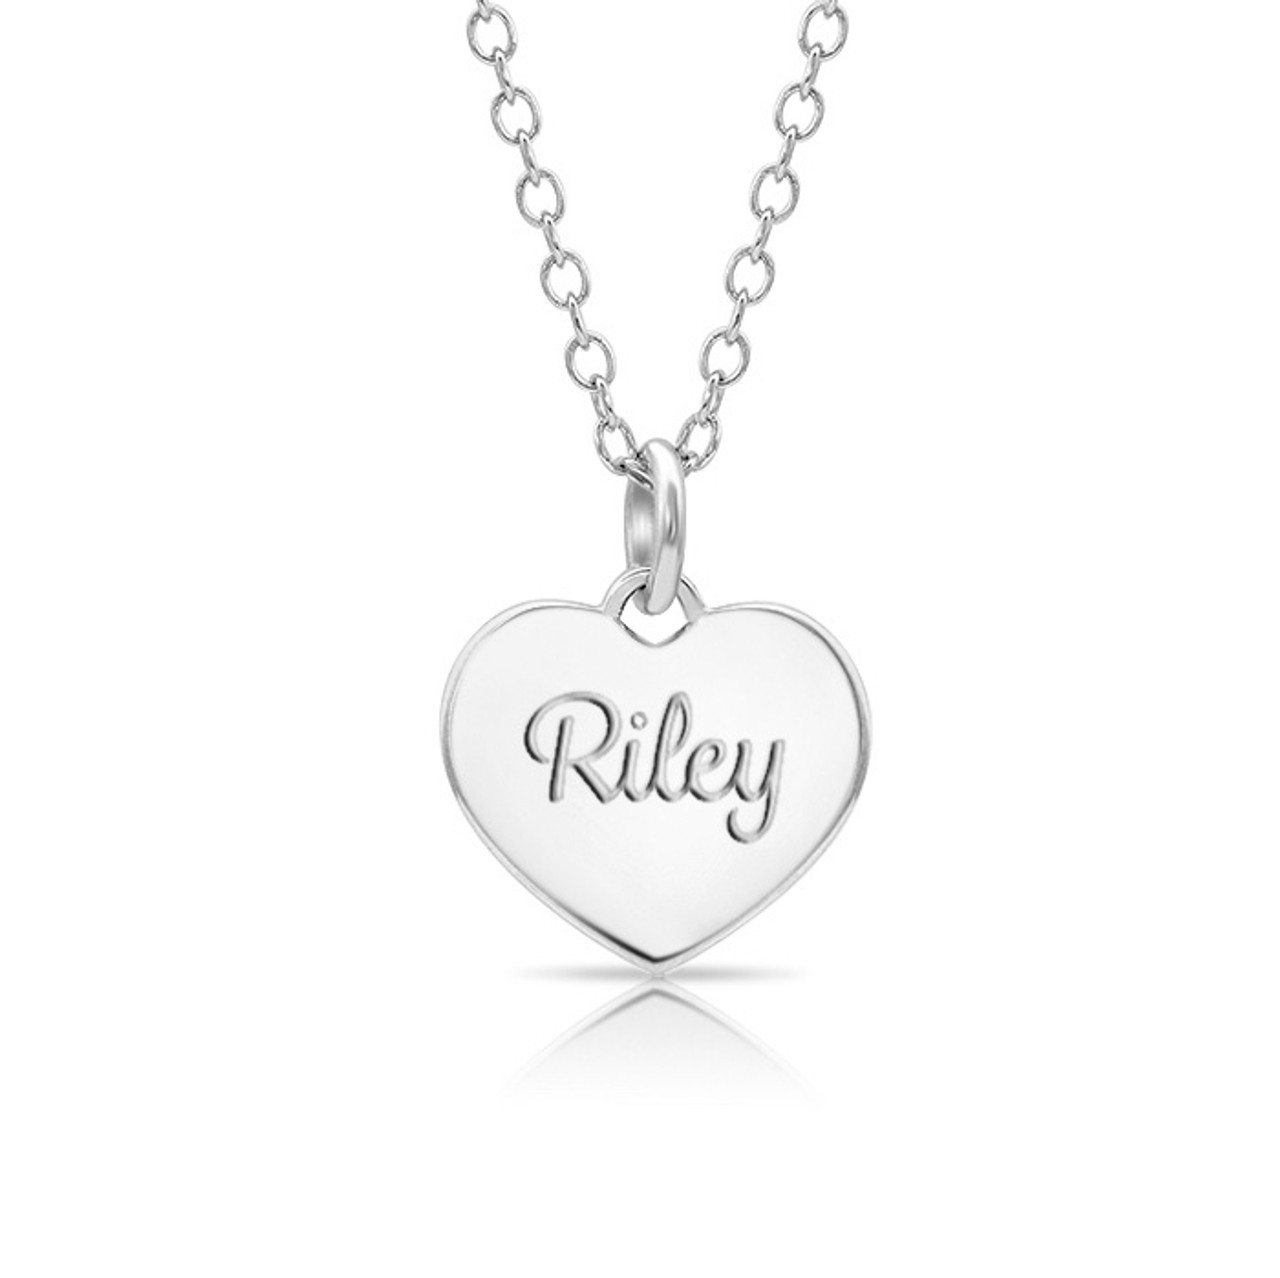 Engraved Heart Cutout Necklace | Fast Delivery Crafted by Silvery